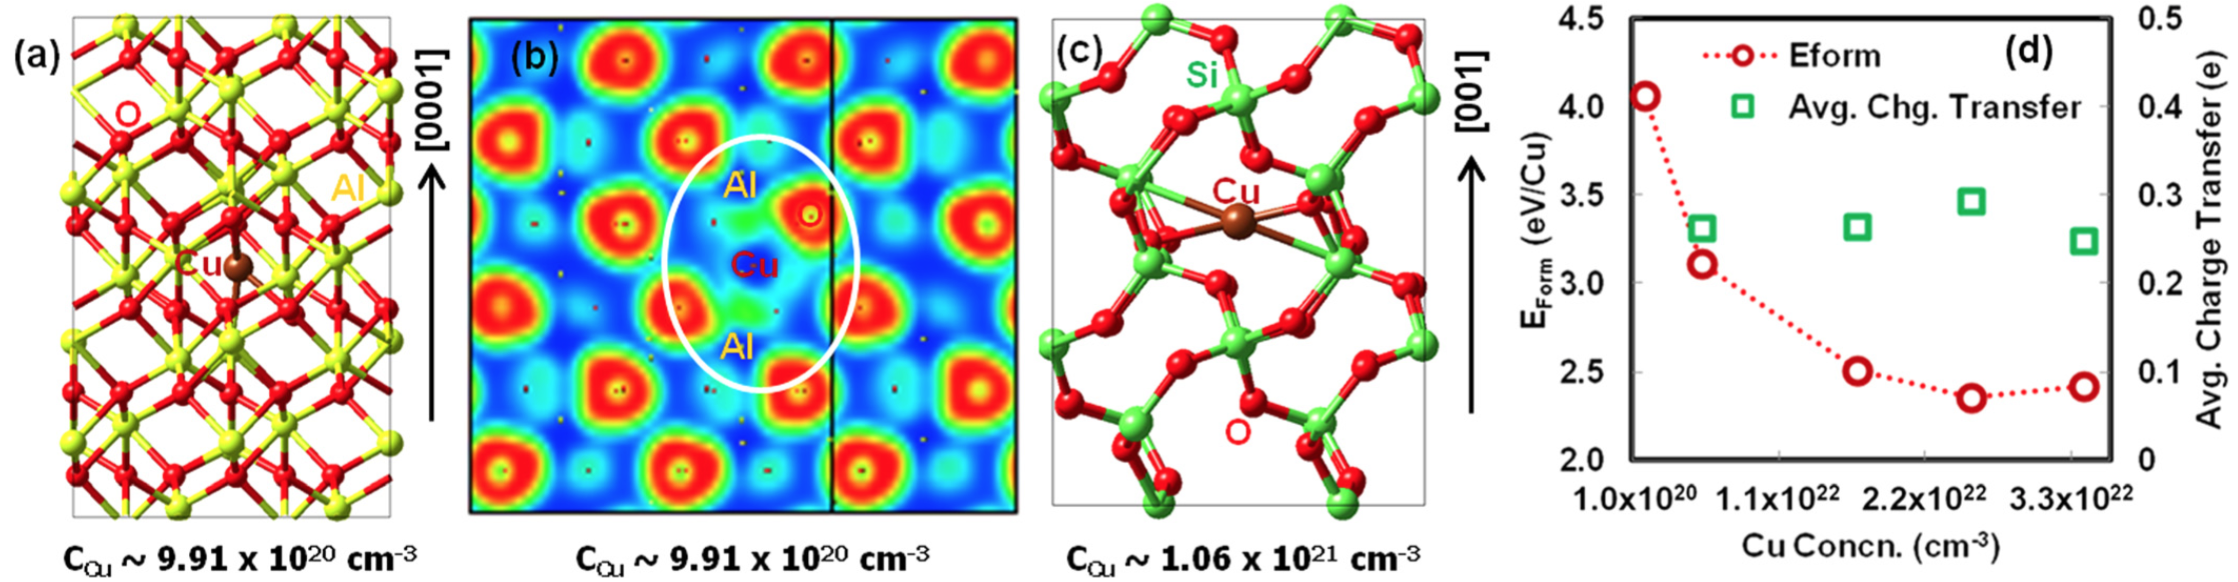 FIG. 1. (a) Structure of a single Cu impurity in a c-Al2O3 (R-3c) 2 2 1 super-cell. Red, brown, and yellow spheres represent O, Cu, and Al atoms, respec- tively. (b) Electron localization function in the plane passing through the center of the Cu impurity bonded to Al and O. Blue-green-red represents low-me- dium-high electron concentration from 0-0.5 to 1.0 e/A ̊ 3, respectively. (c) Cu interaction with Si and O in a-quartz c-SiO2. Red, brown, and green spheres are O, Cu, and Si atoms, respectively. (d) The computed formation energy (eV per Cu atom) (circles) and the average charge transfer (squares) as a function of Cu impurity concentration in SiO2.